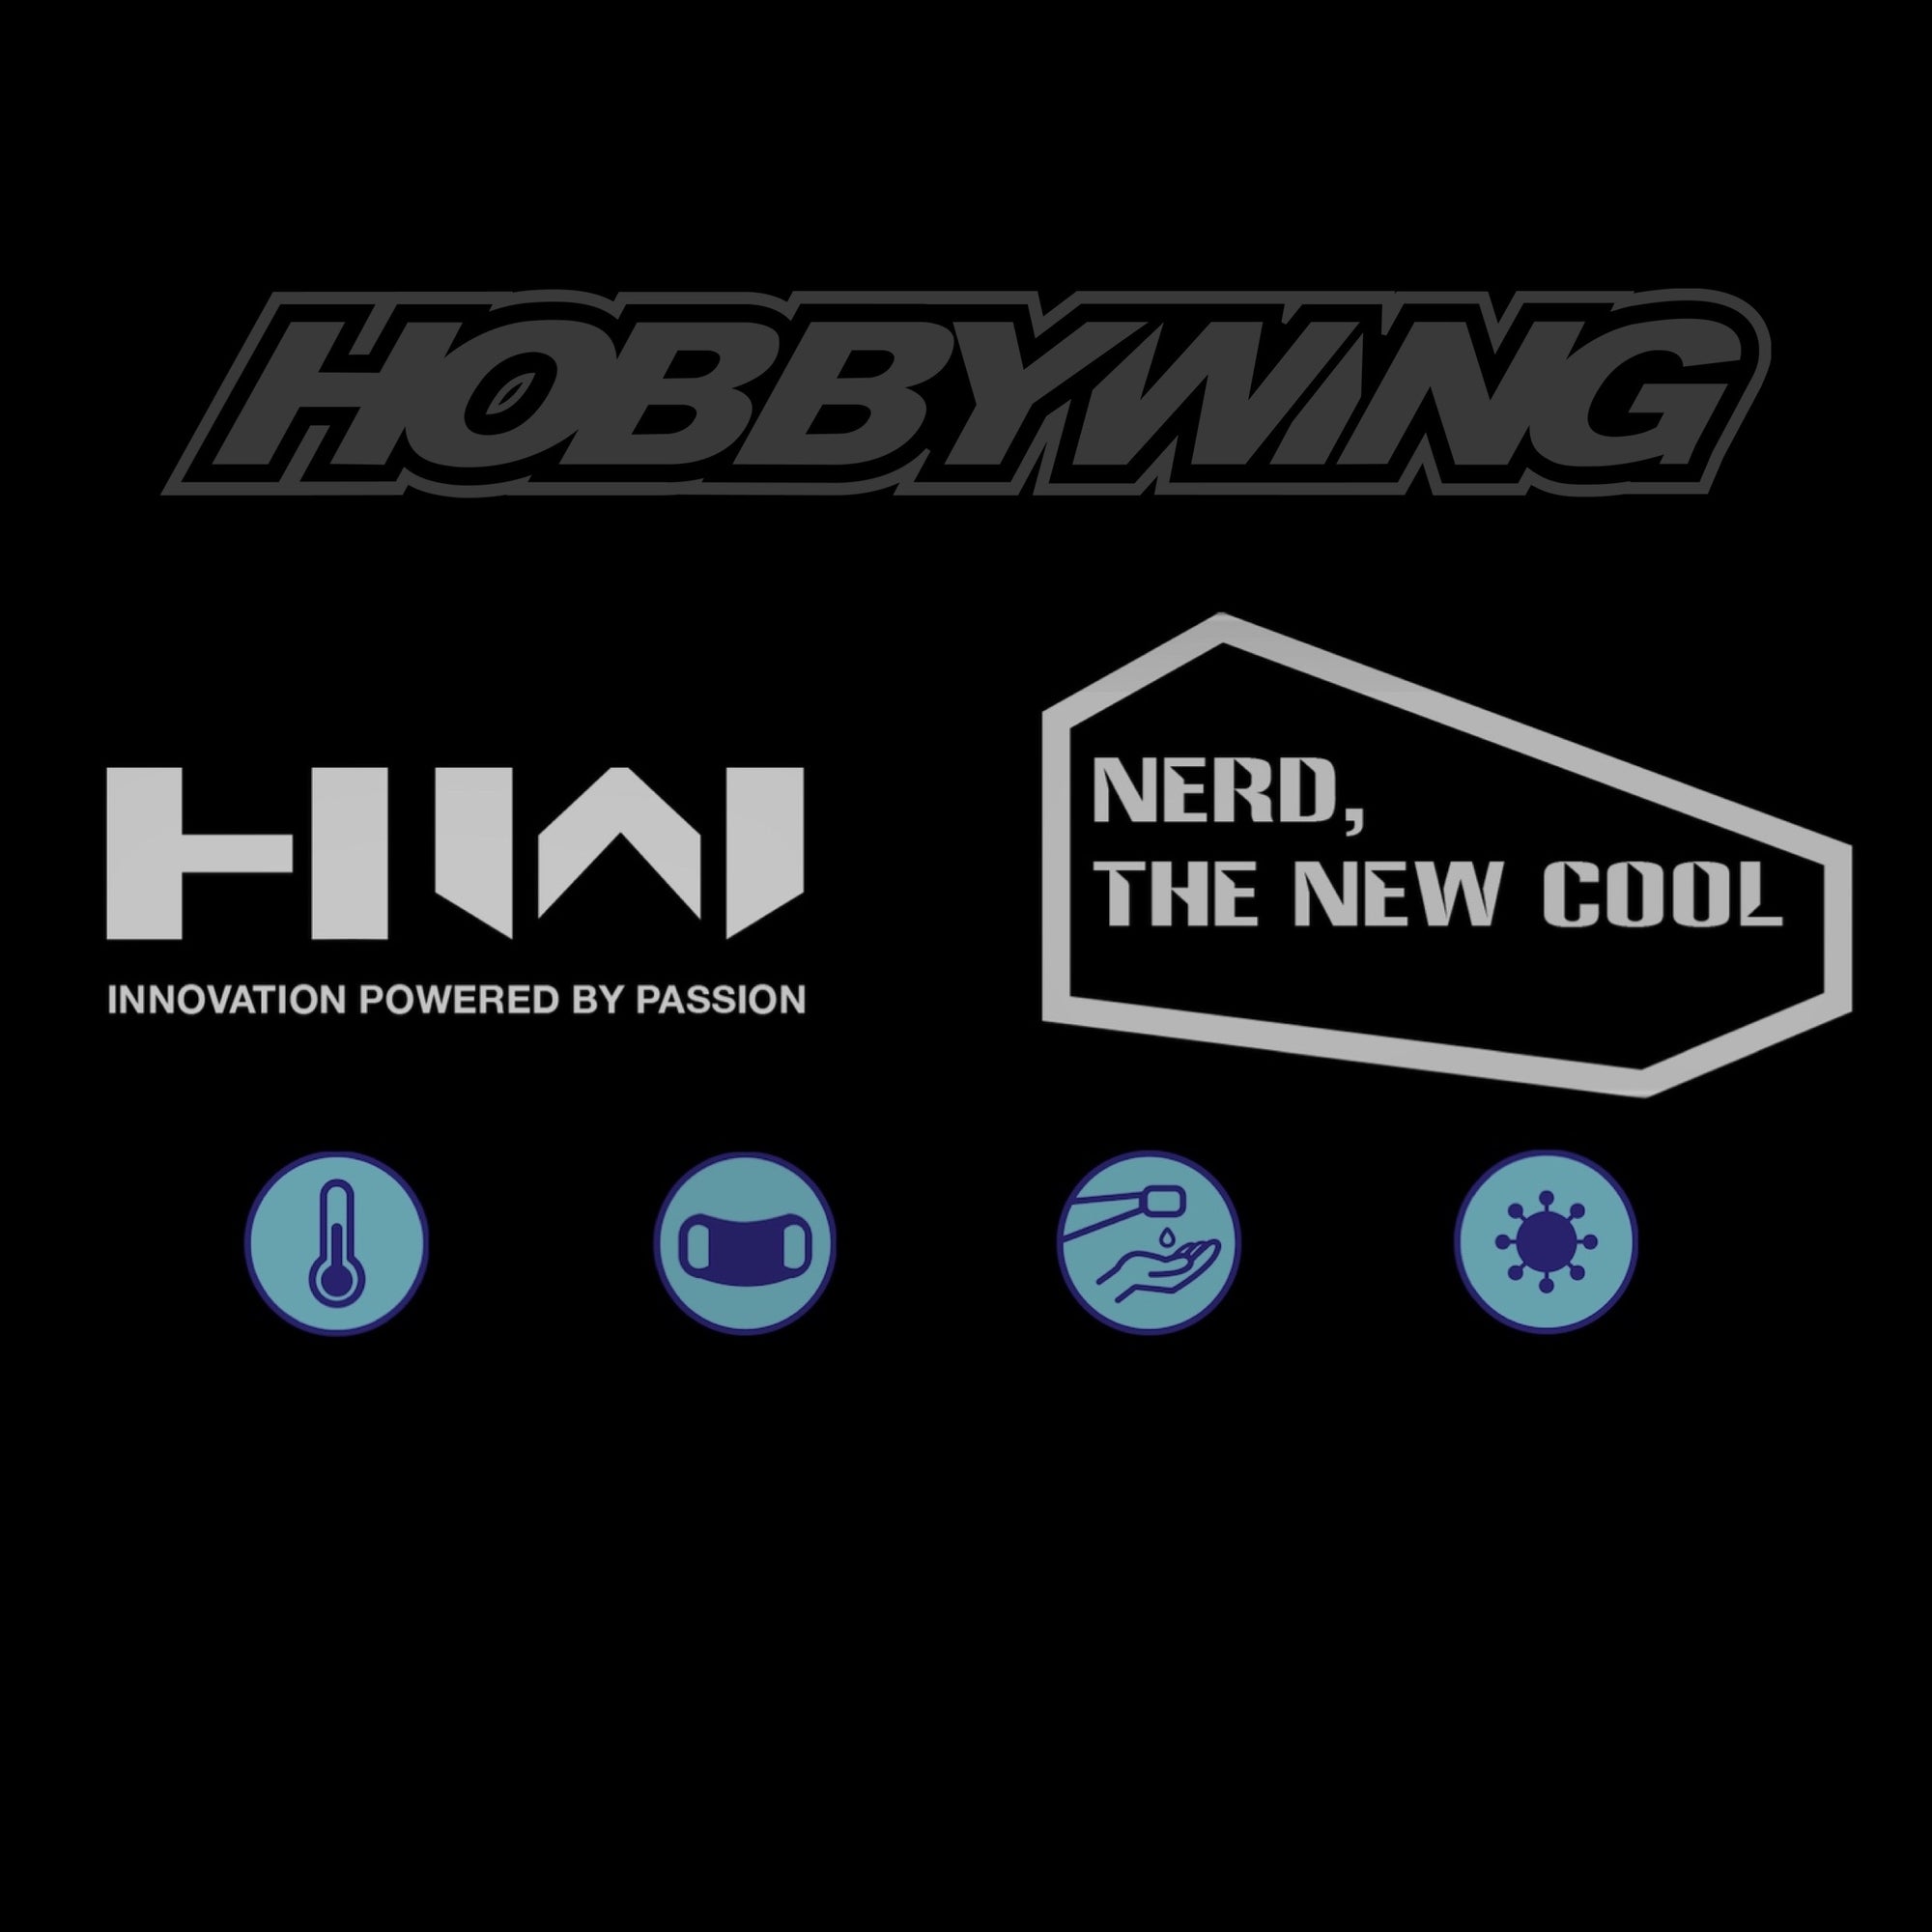 How HOBBYWING Team in North America responding to COVID-19